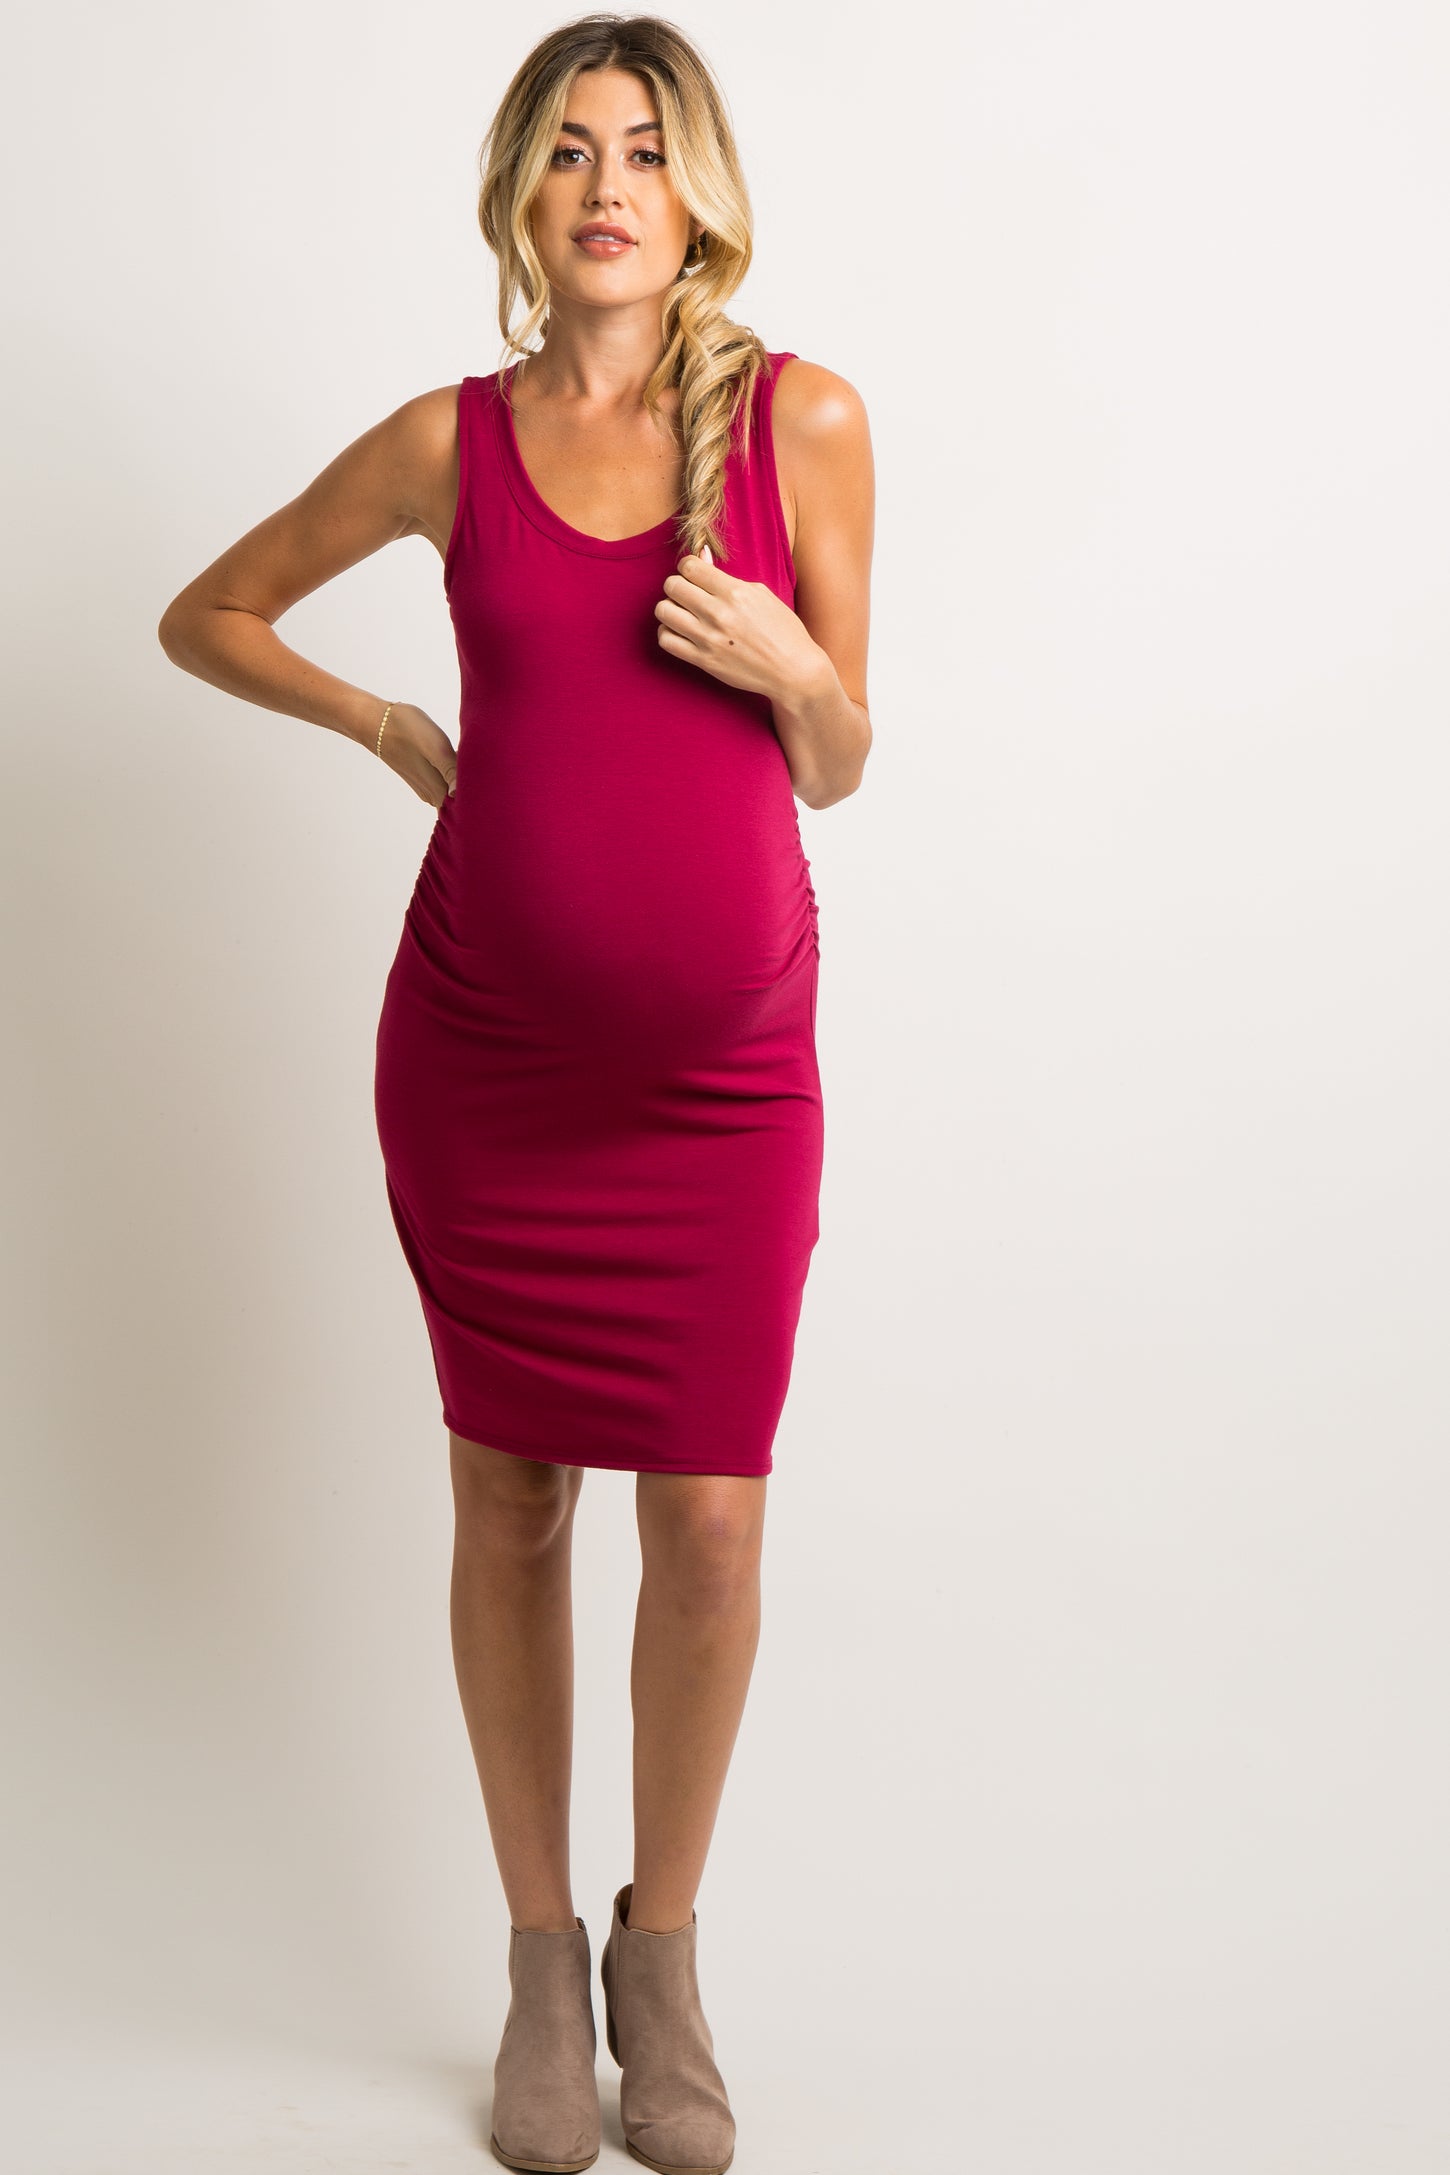 PinkBlush Burgundy Sleeveless Ruched Fitted Maternity Dress